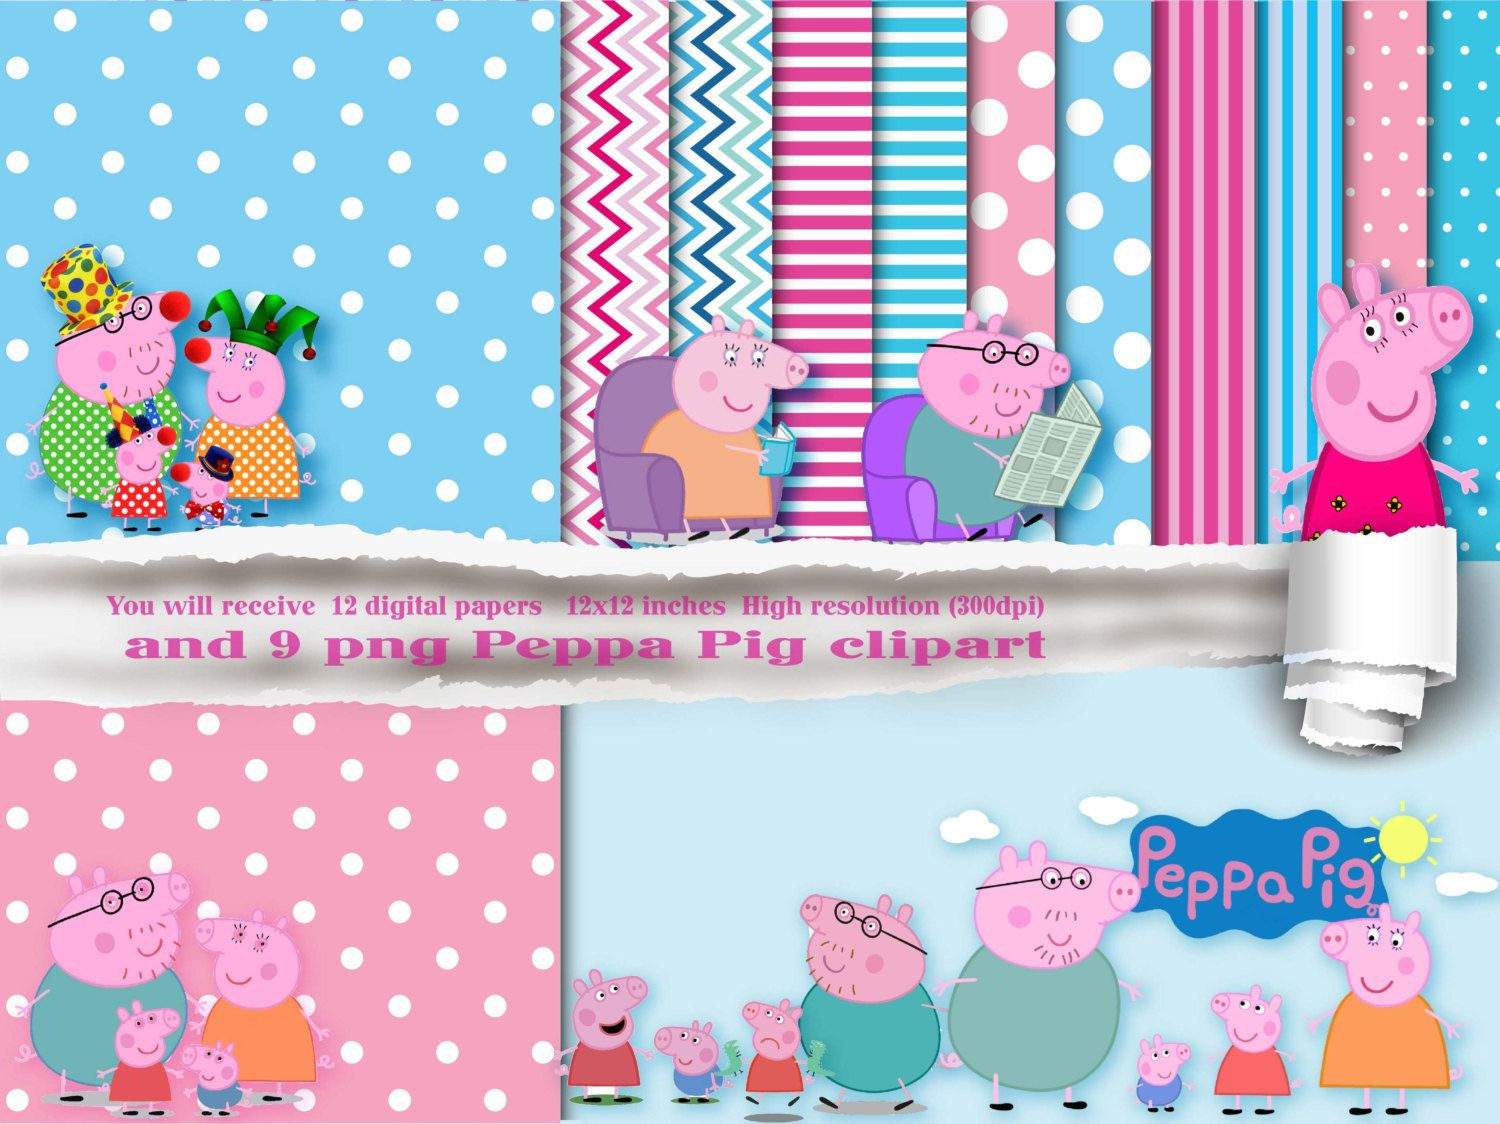 Digital Download Discoveries for PEPPA PIG PAPER from EasyPeach.com